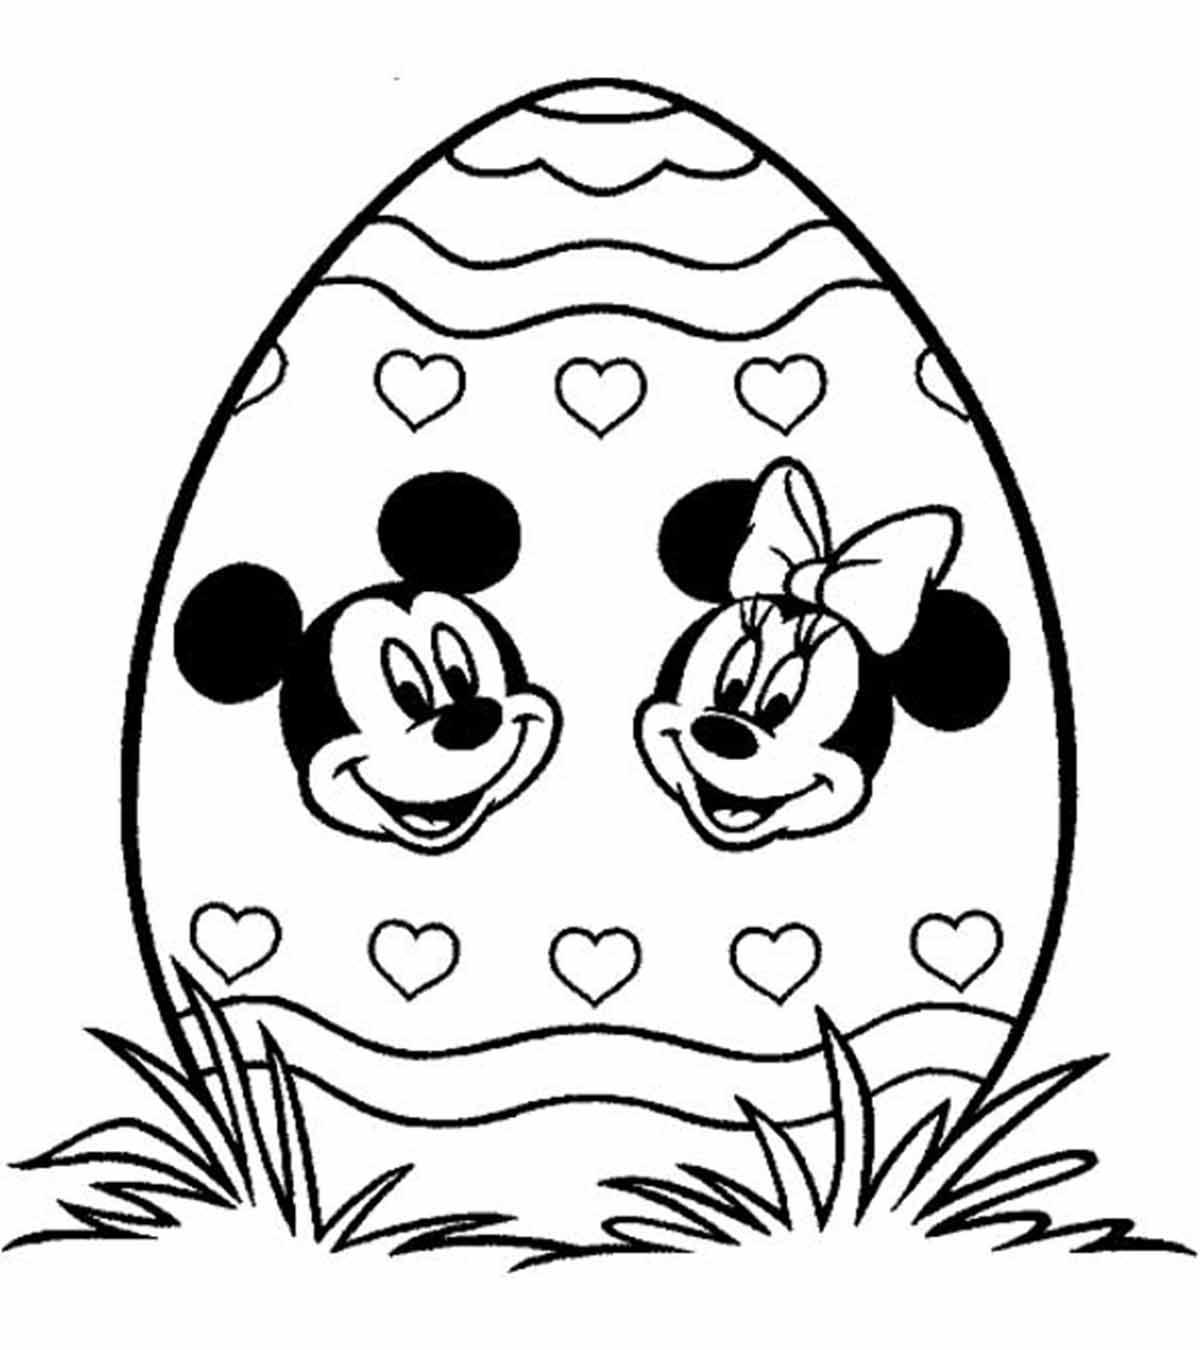 Top 10 Disney Easter Coloring Pages For Your Toddler_image